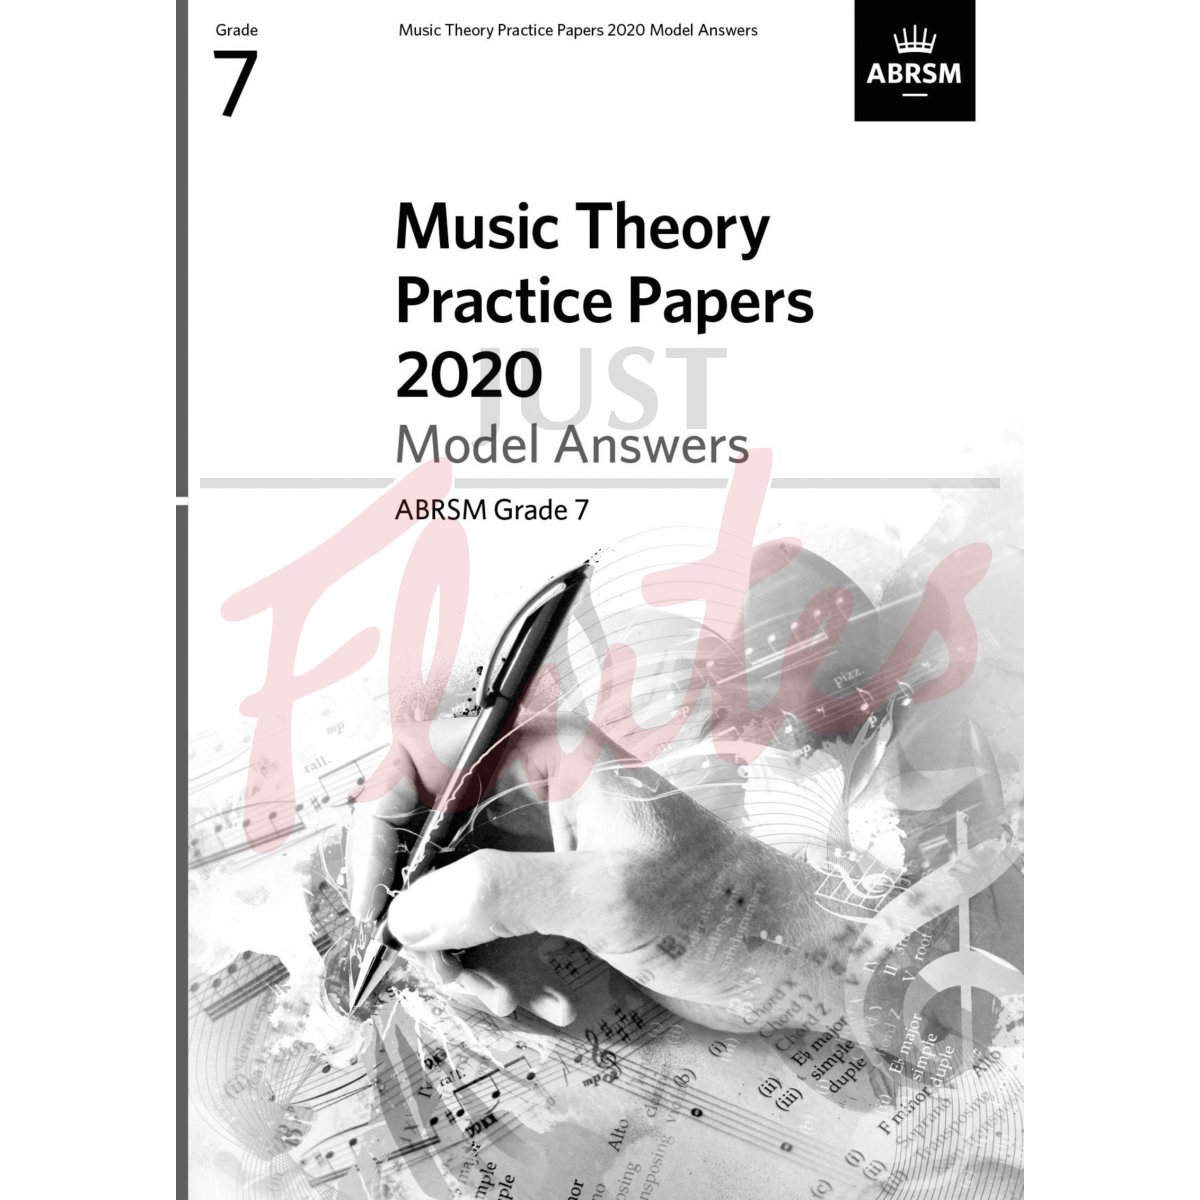 Music Theory Practice Papers 2020 Grade 7 Model Answers